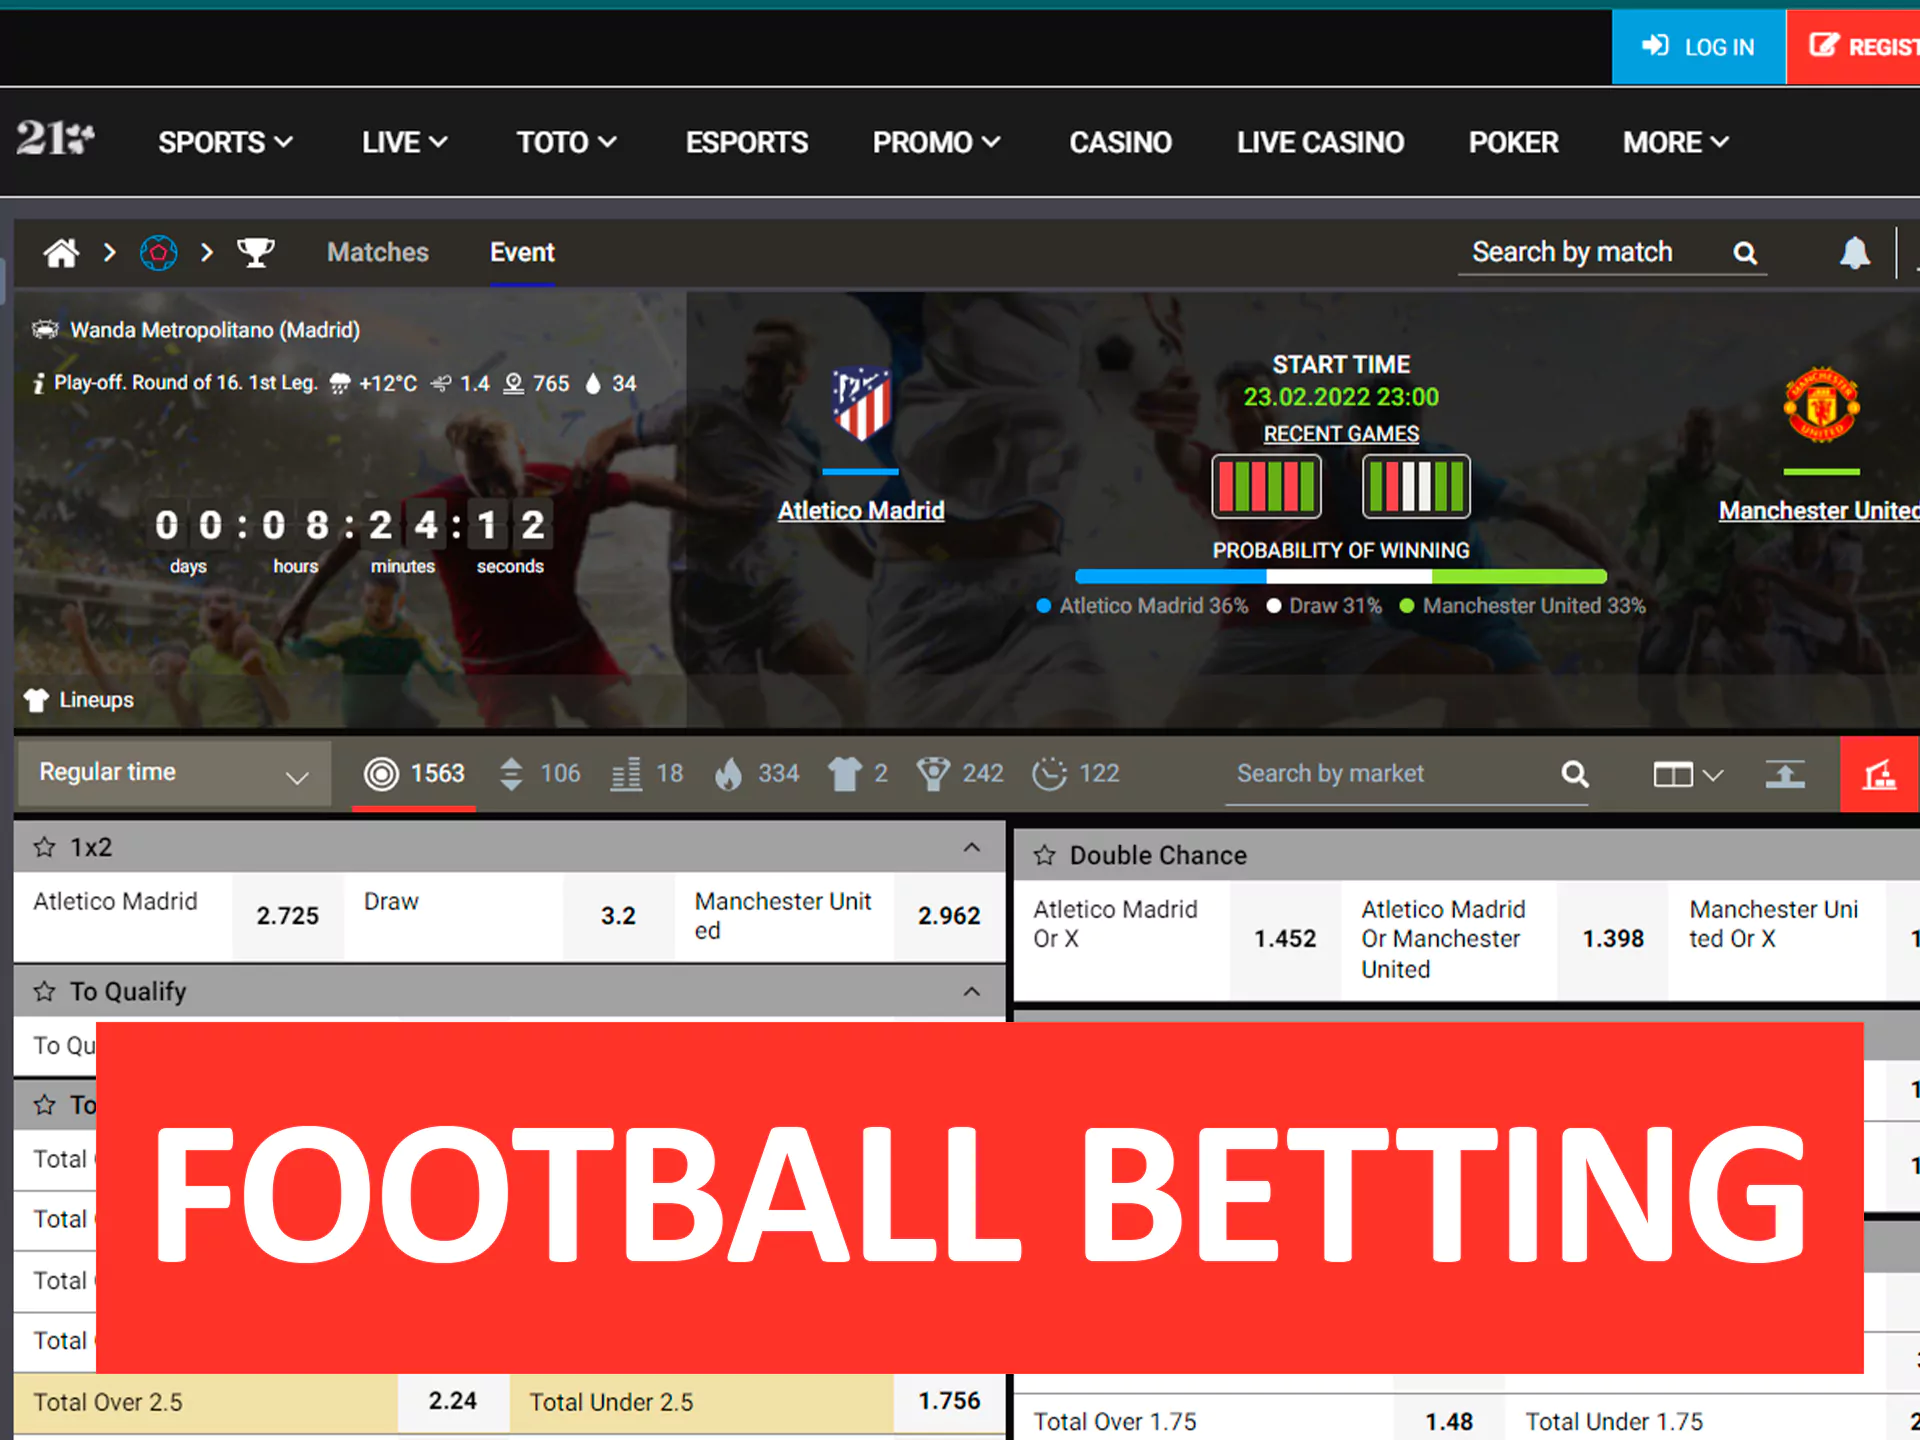 You can bet on your favorite footbal teams.